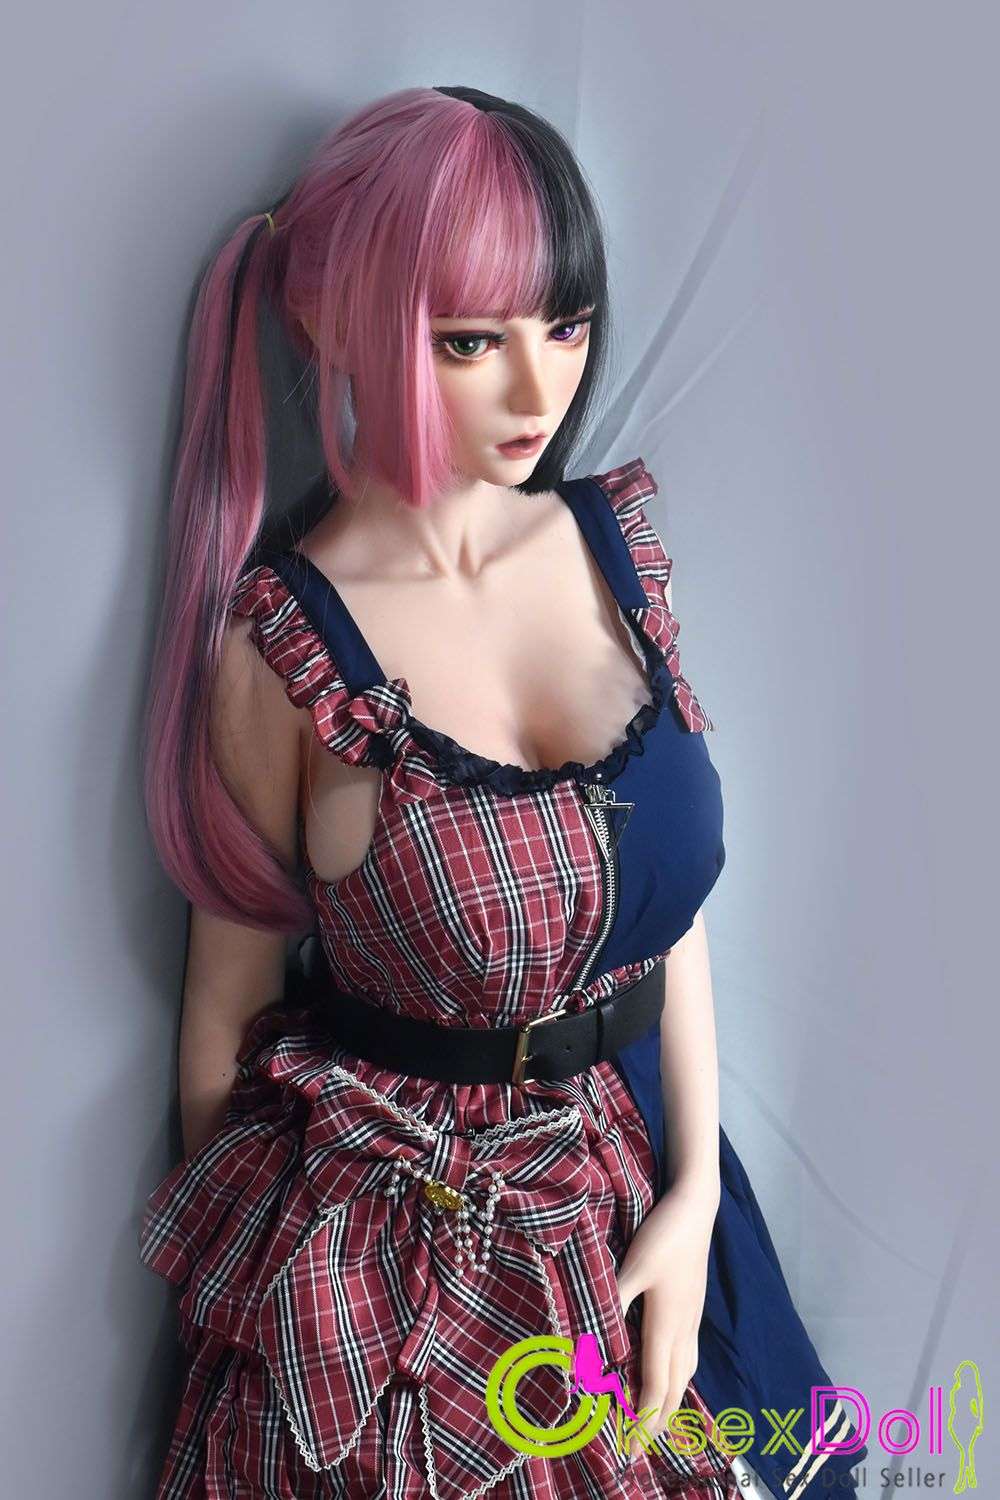 elsababe-doll.html F-cup Real Doll Pictures